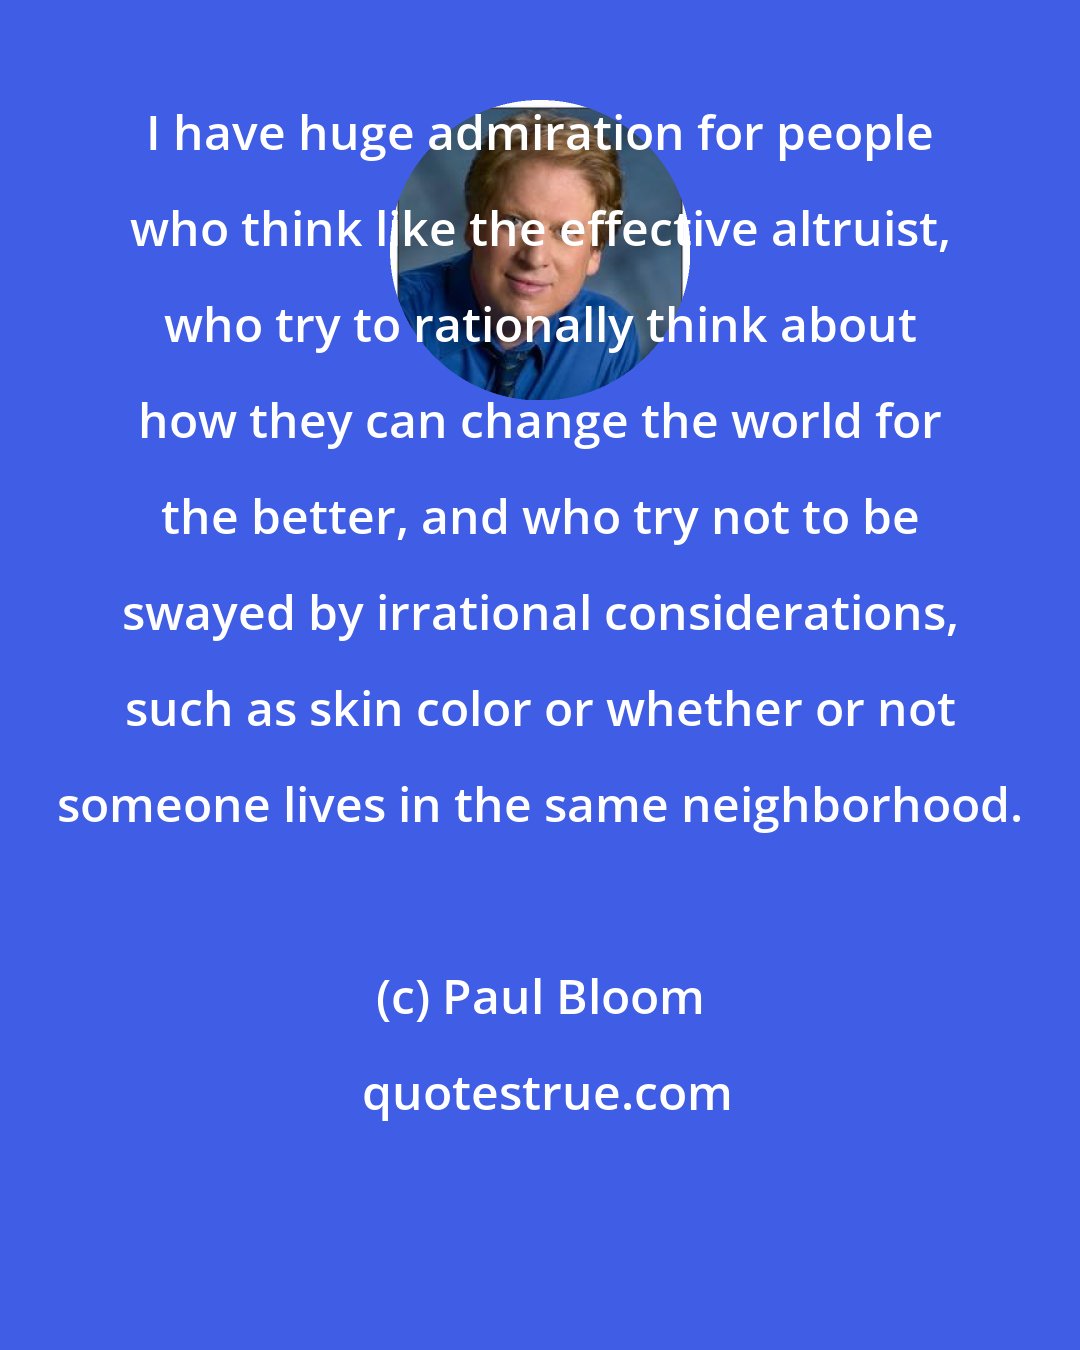 Paul Bloom: I have huge admiration for people who think like the effective altruist, who try to rationally think about how they can change the world for the better, and who try not to be swayed by irrational considerations, such as skin color or whether or not someone lives in the same neighborhood.